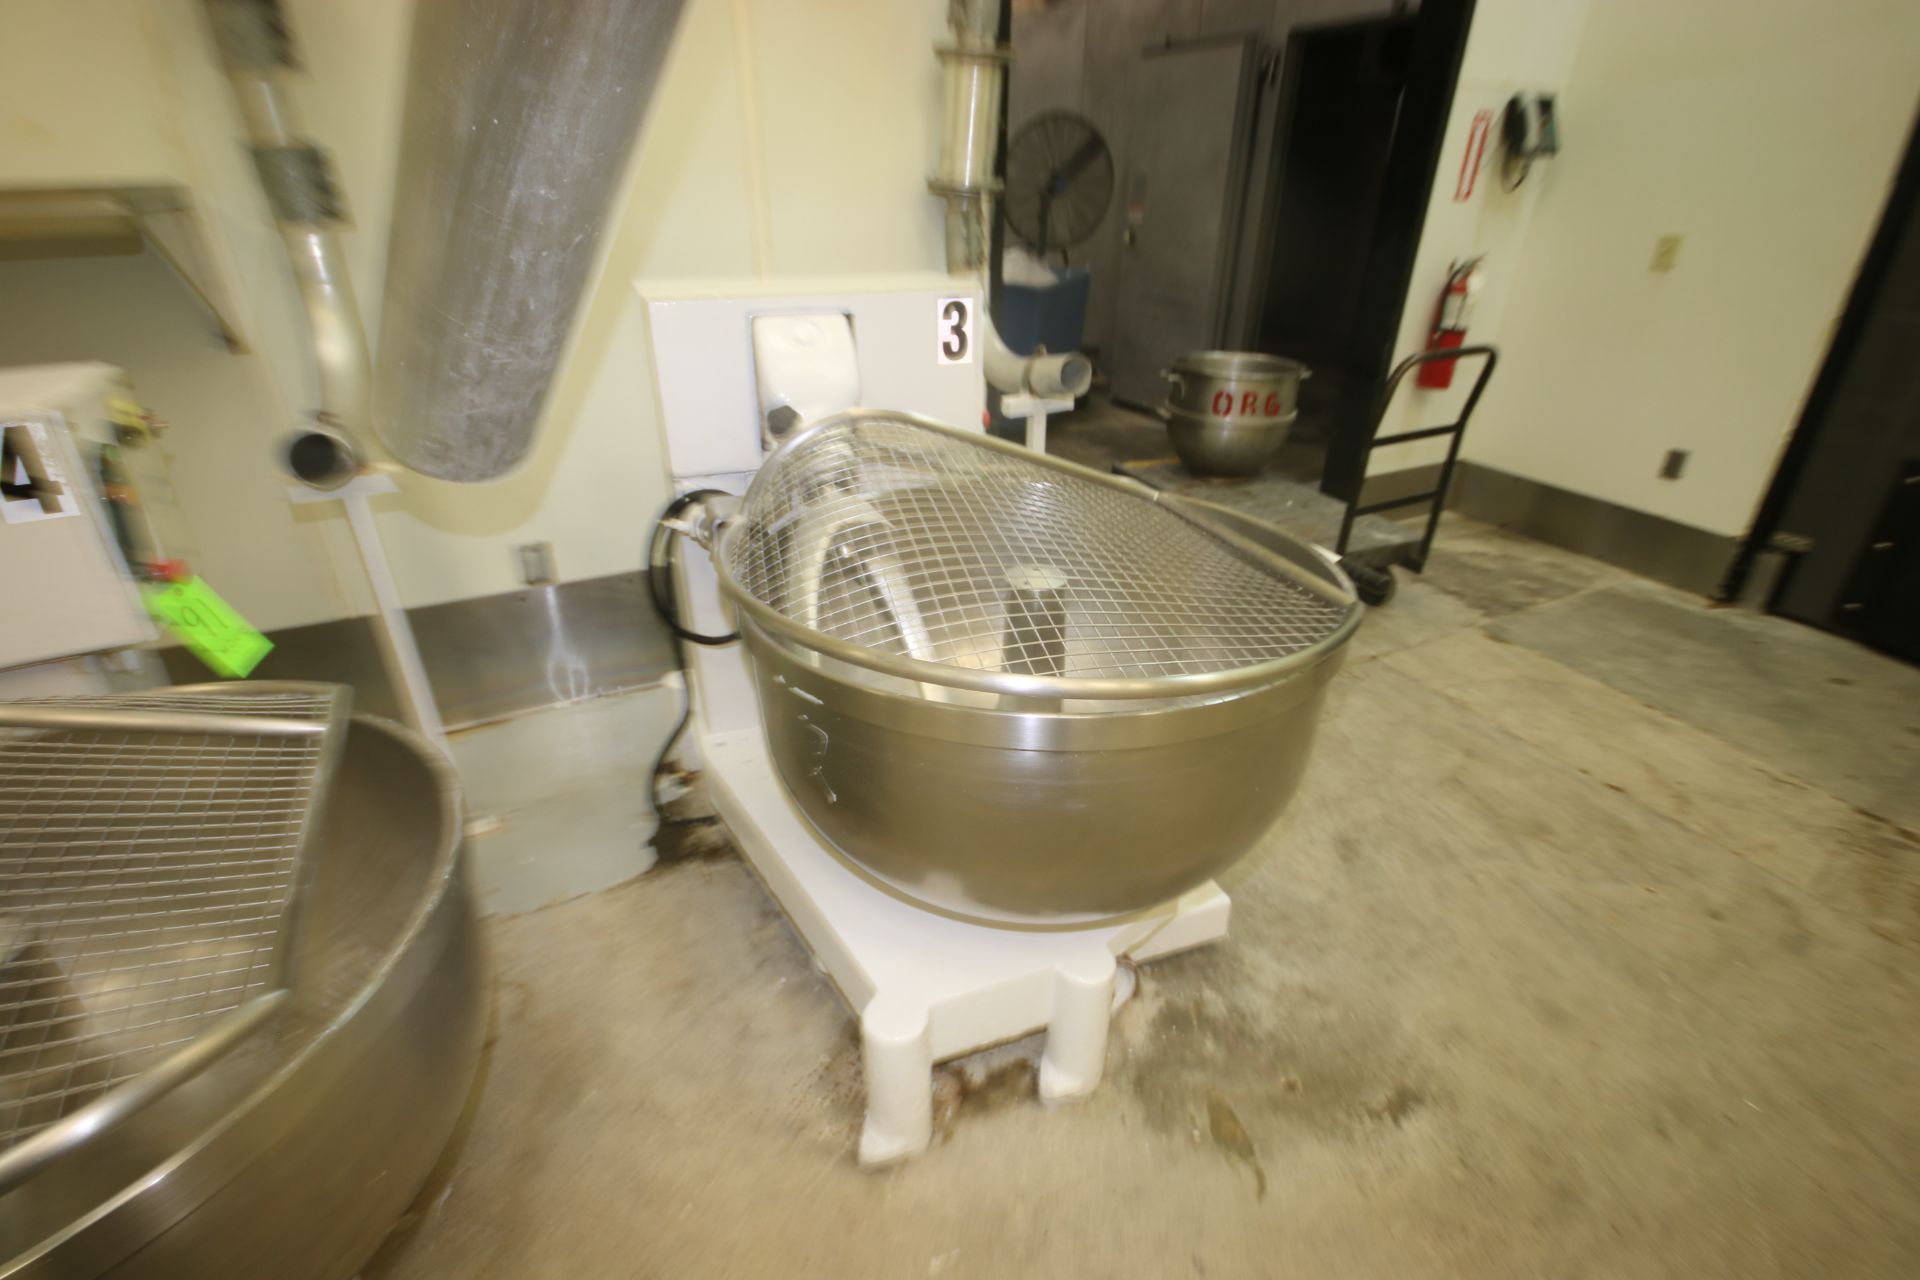 VMI Phebus 2000 Dough Mixer, M/N 2330 MAL, S/N 131206, 208 Volts, Bowl Separates From Mixer--See - Image 4 of 6